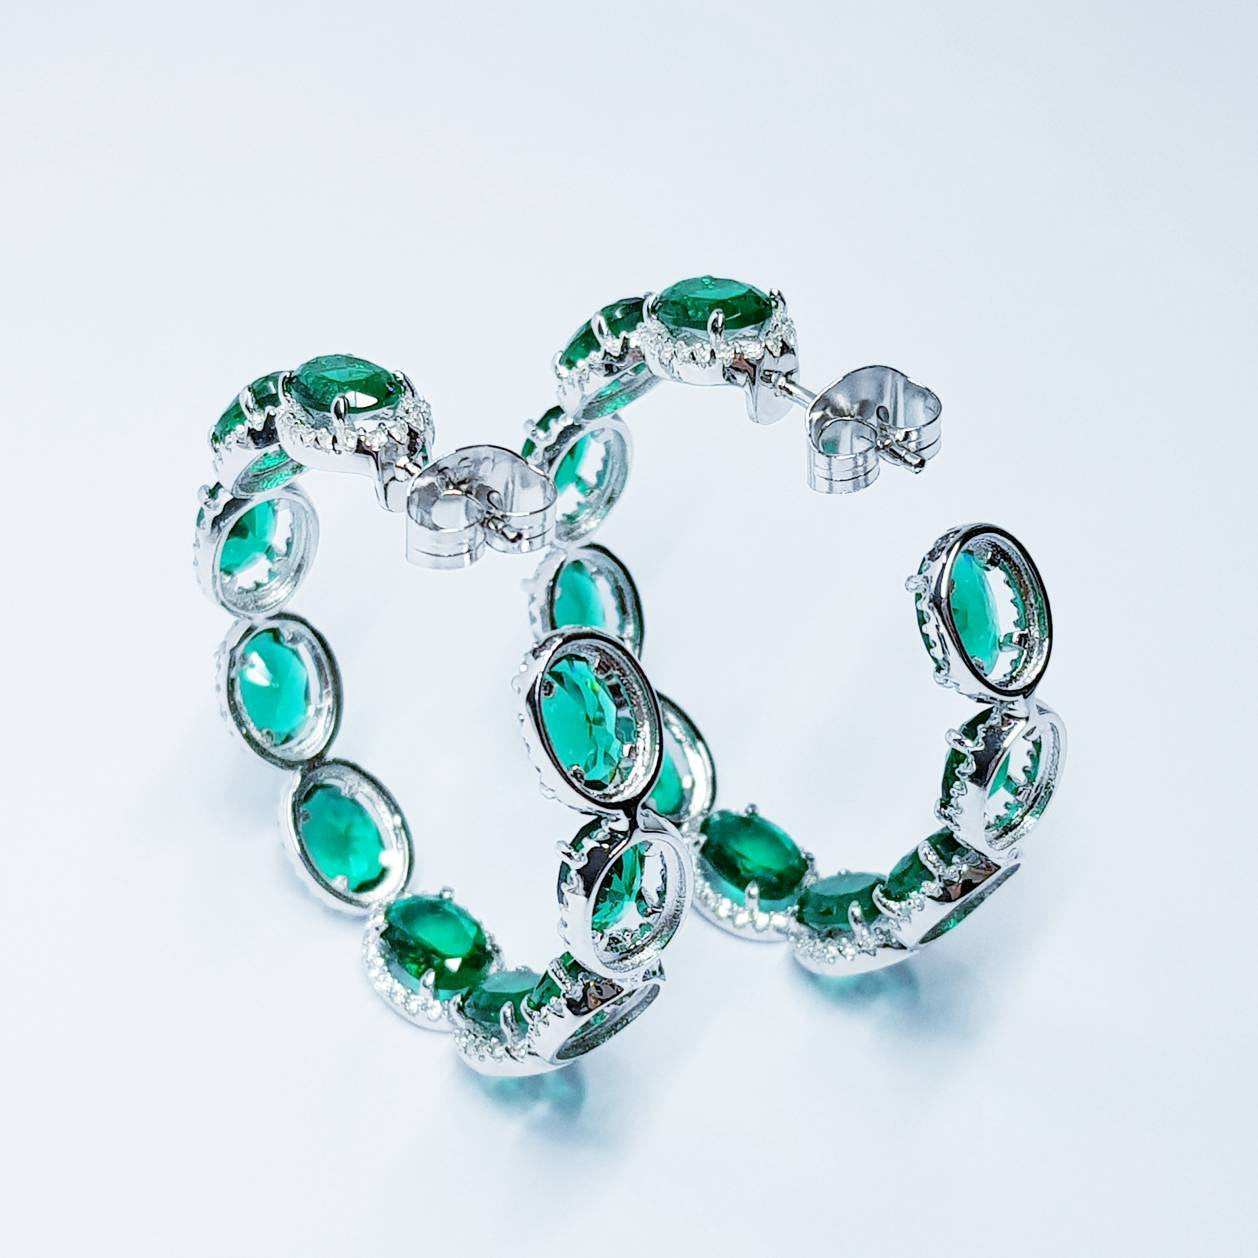 Large Green Earrings, Statement Earrings, Glamourous Jewelry, Emerald and Diamonds